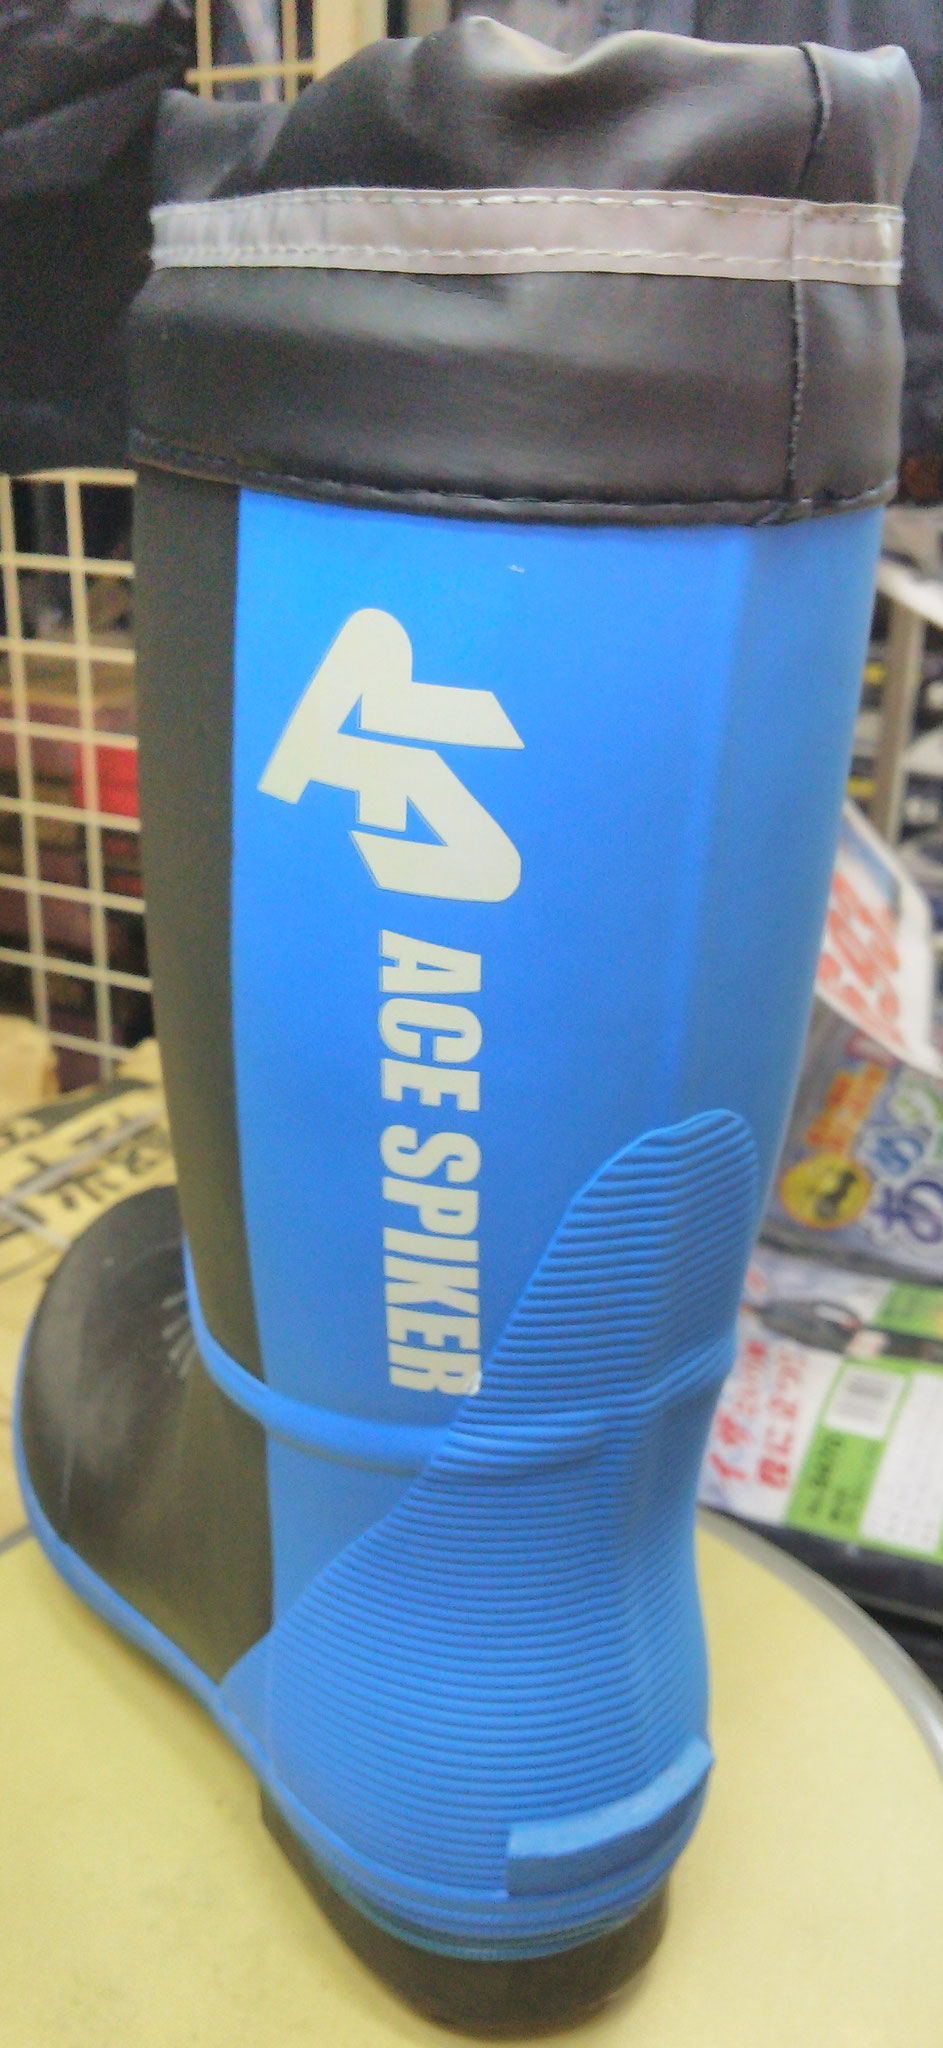 KR-7200 ACE SPIKER スパイク長靴　￥3,990（税込）後ろは綺麗なブルー色。